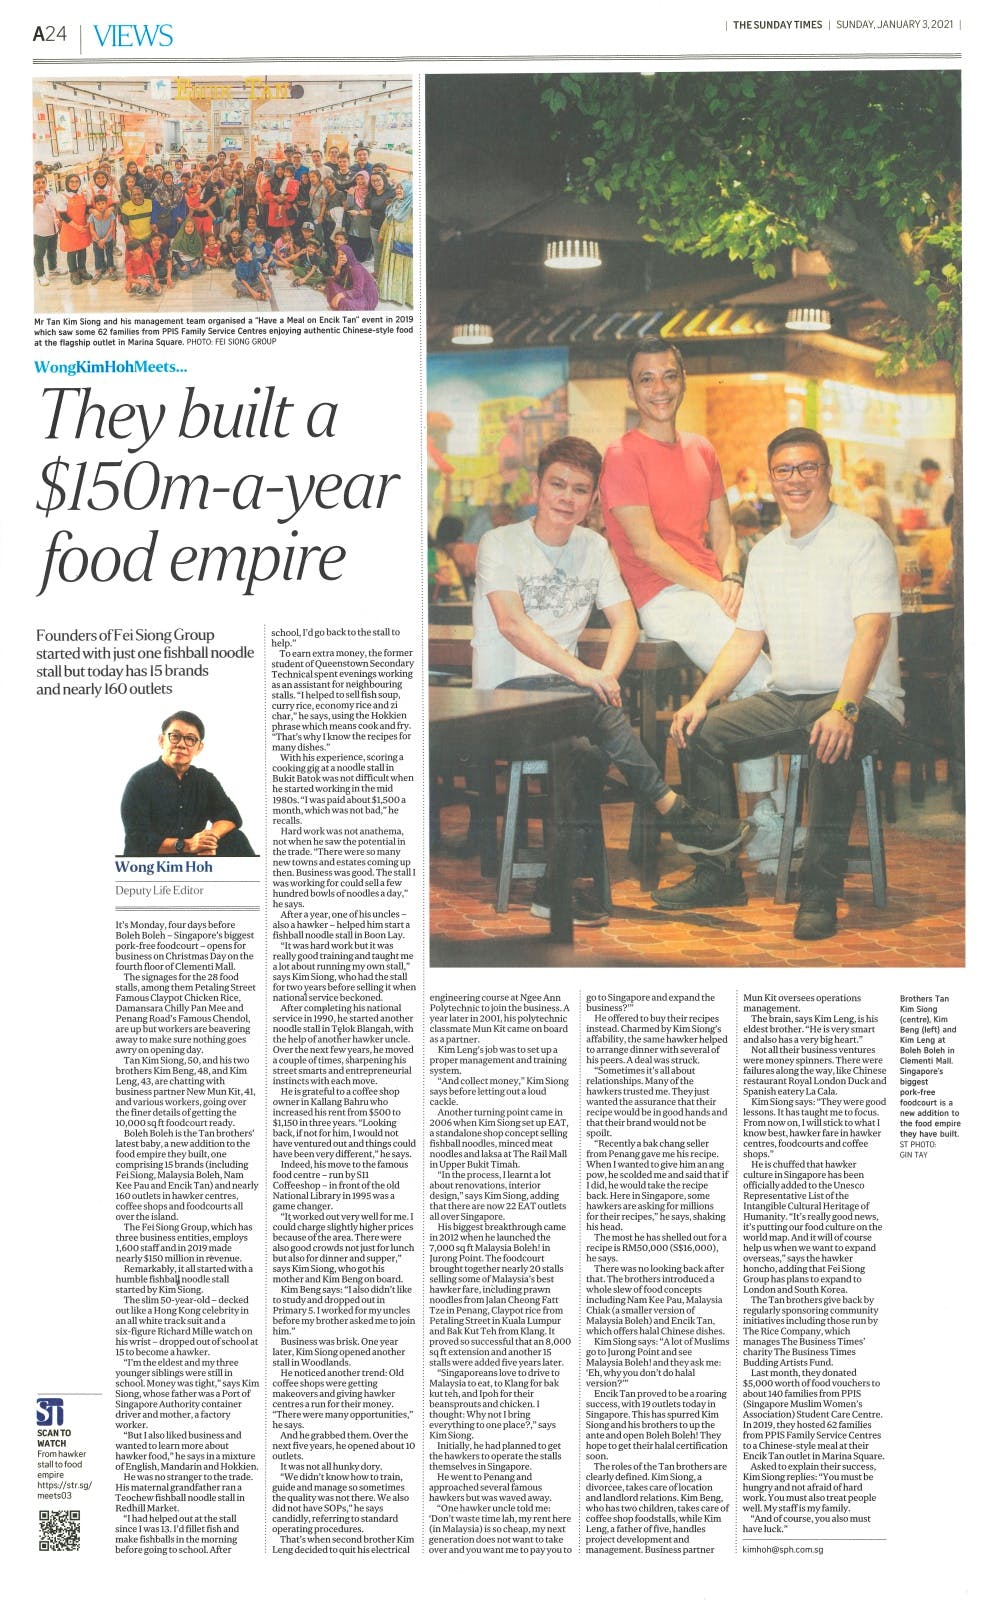 Sunday Times - They built a $150m-a-year food empire​